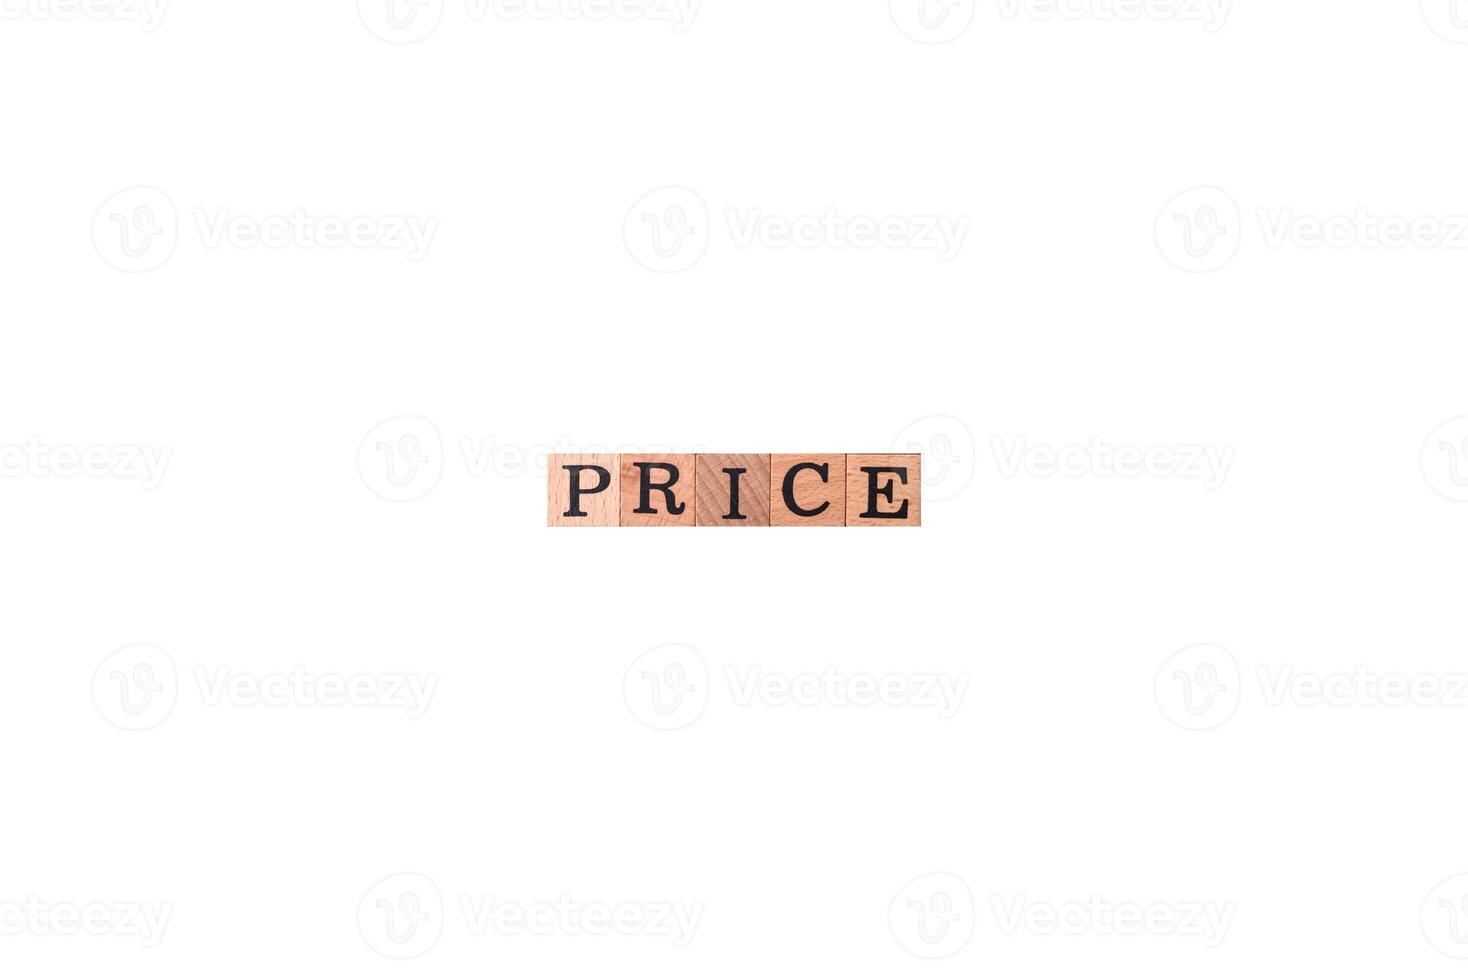 The inscription Price inspection made of wooden cubes on a plain background photo